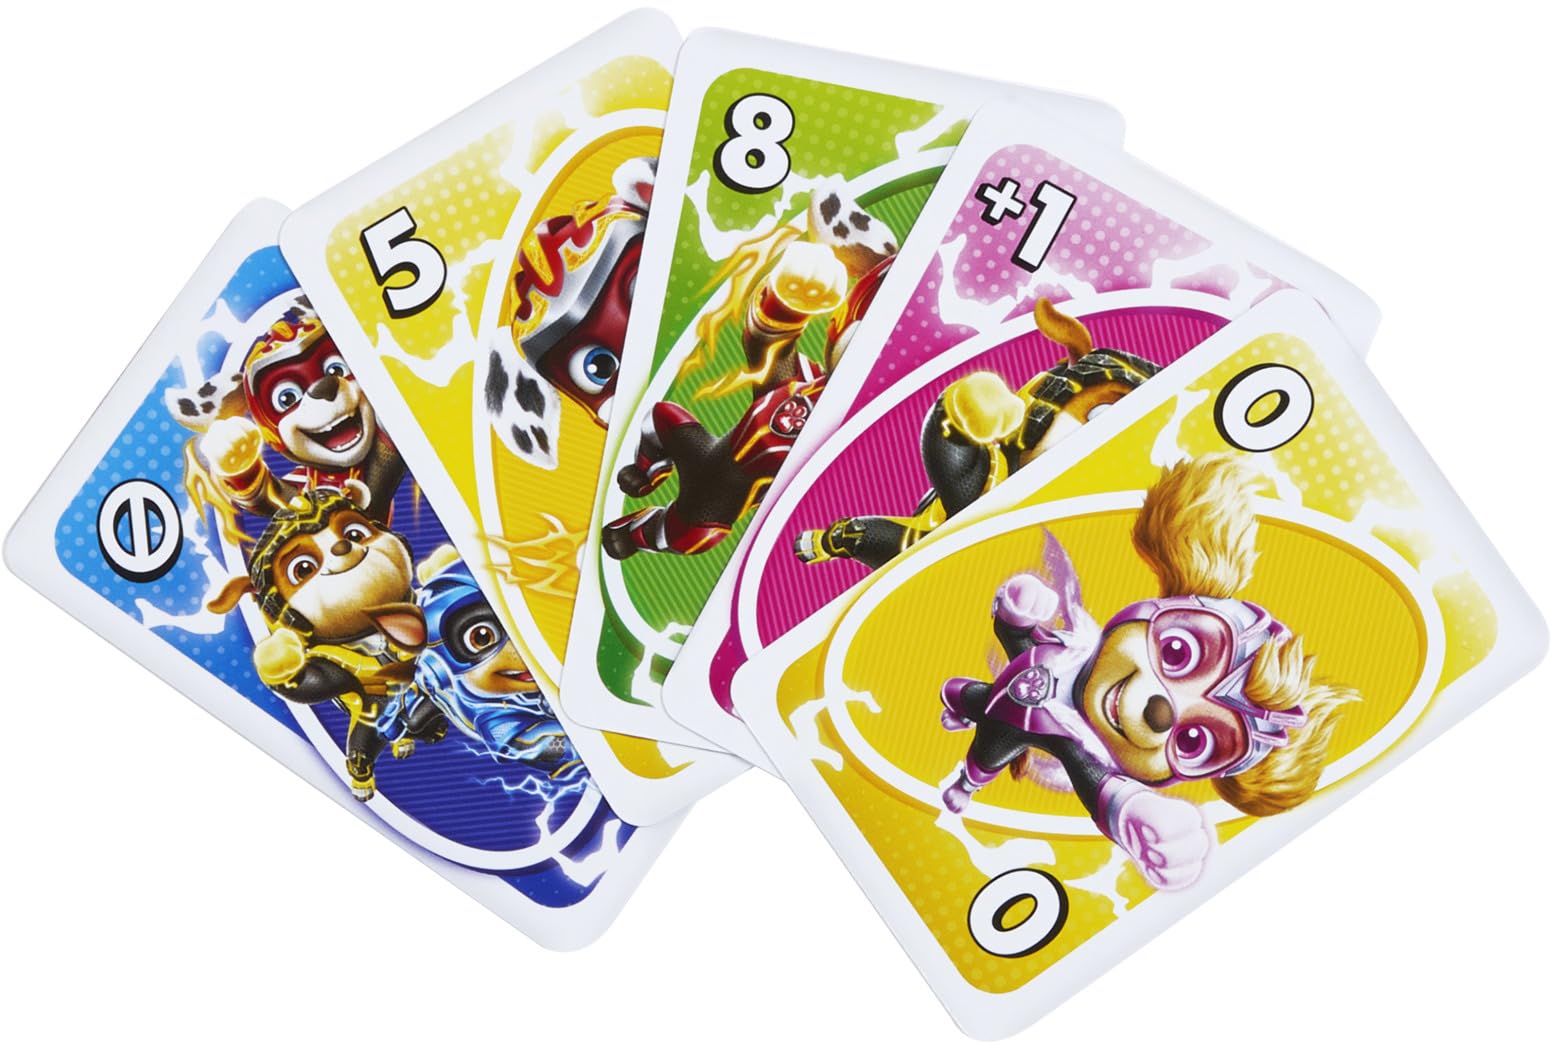 UNO Junior Paw Patrol: The Mighty Movie Kids Card Game for Family Night Featuring 3 Levels of Play